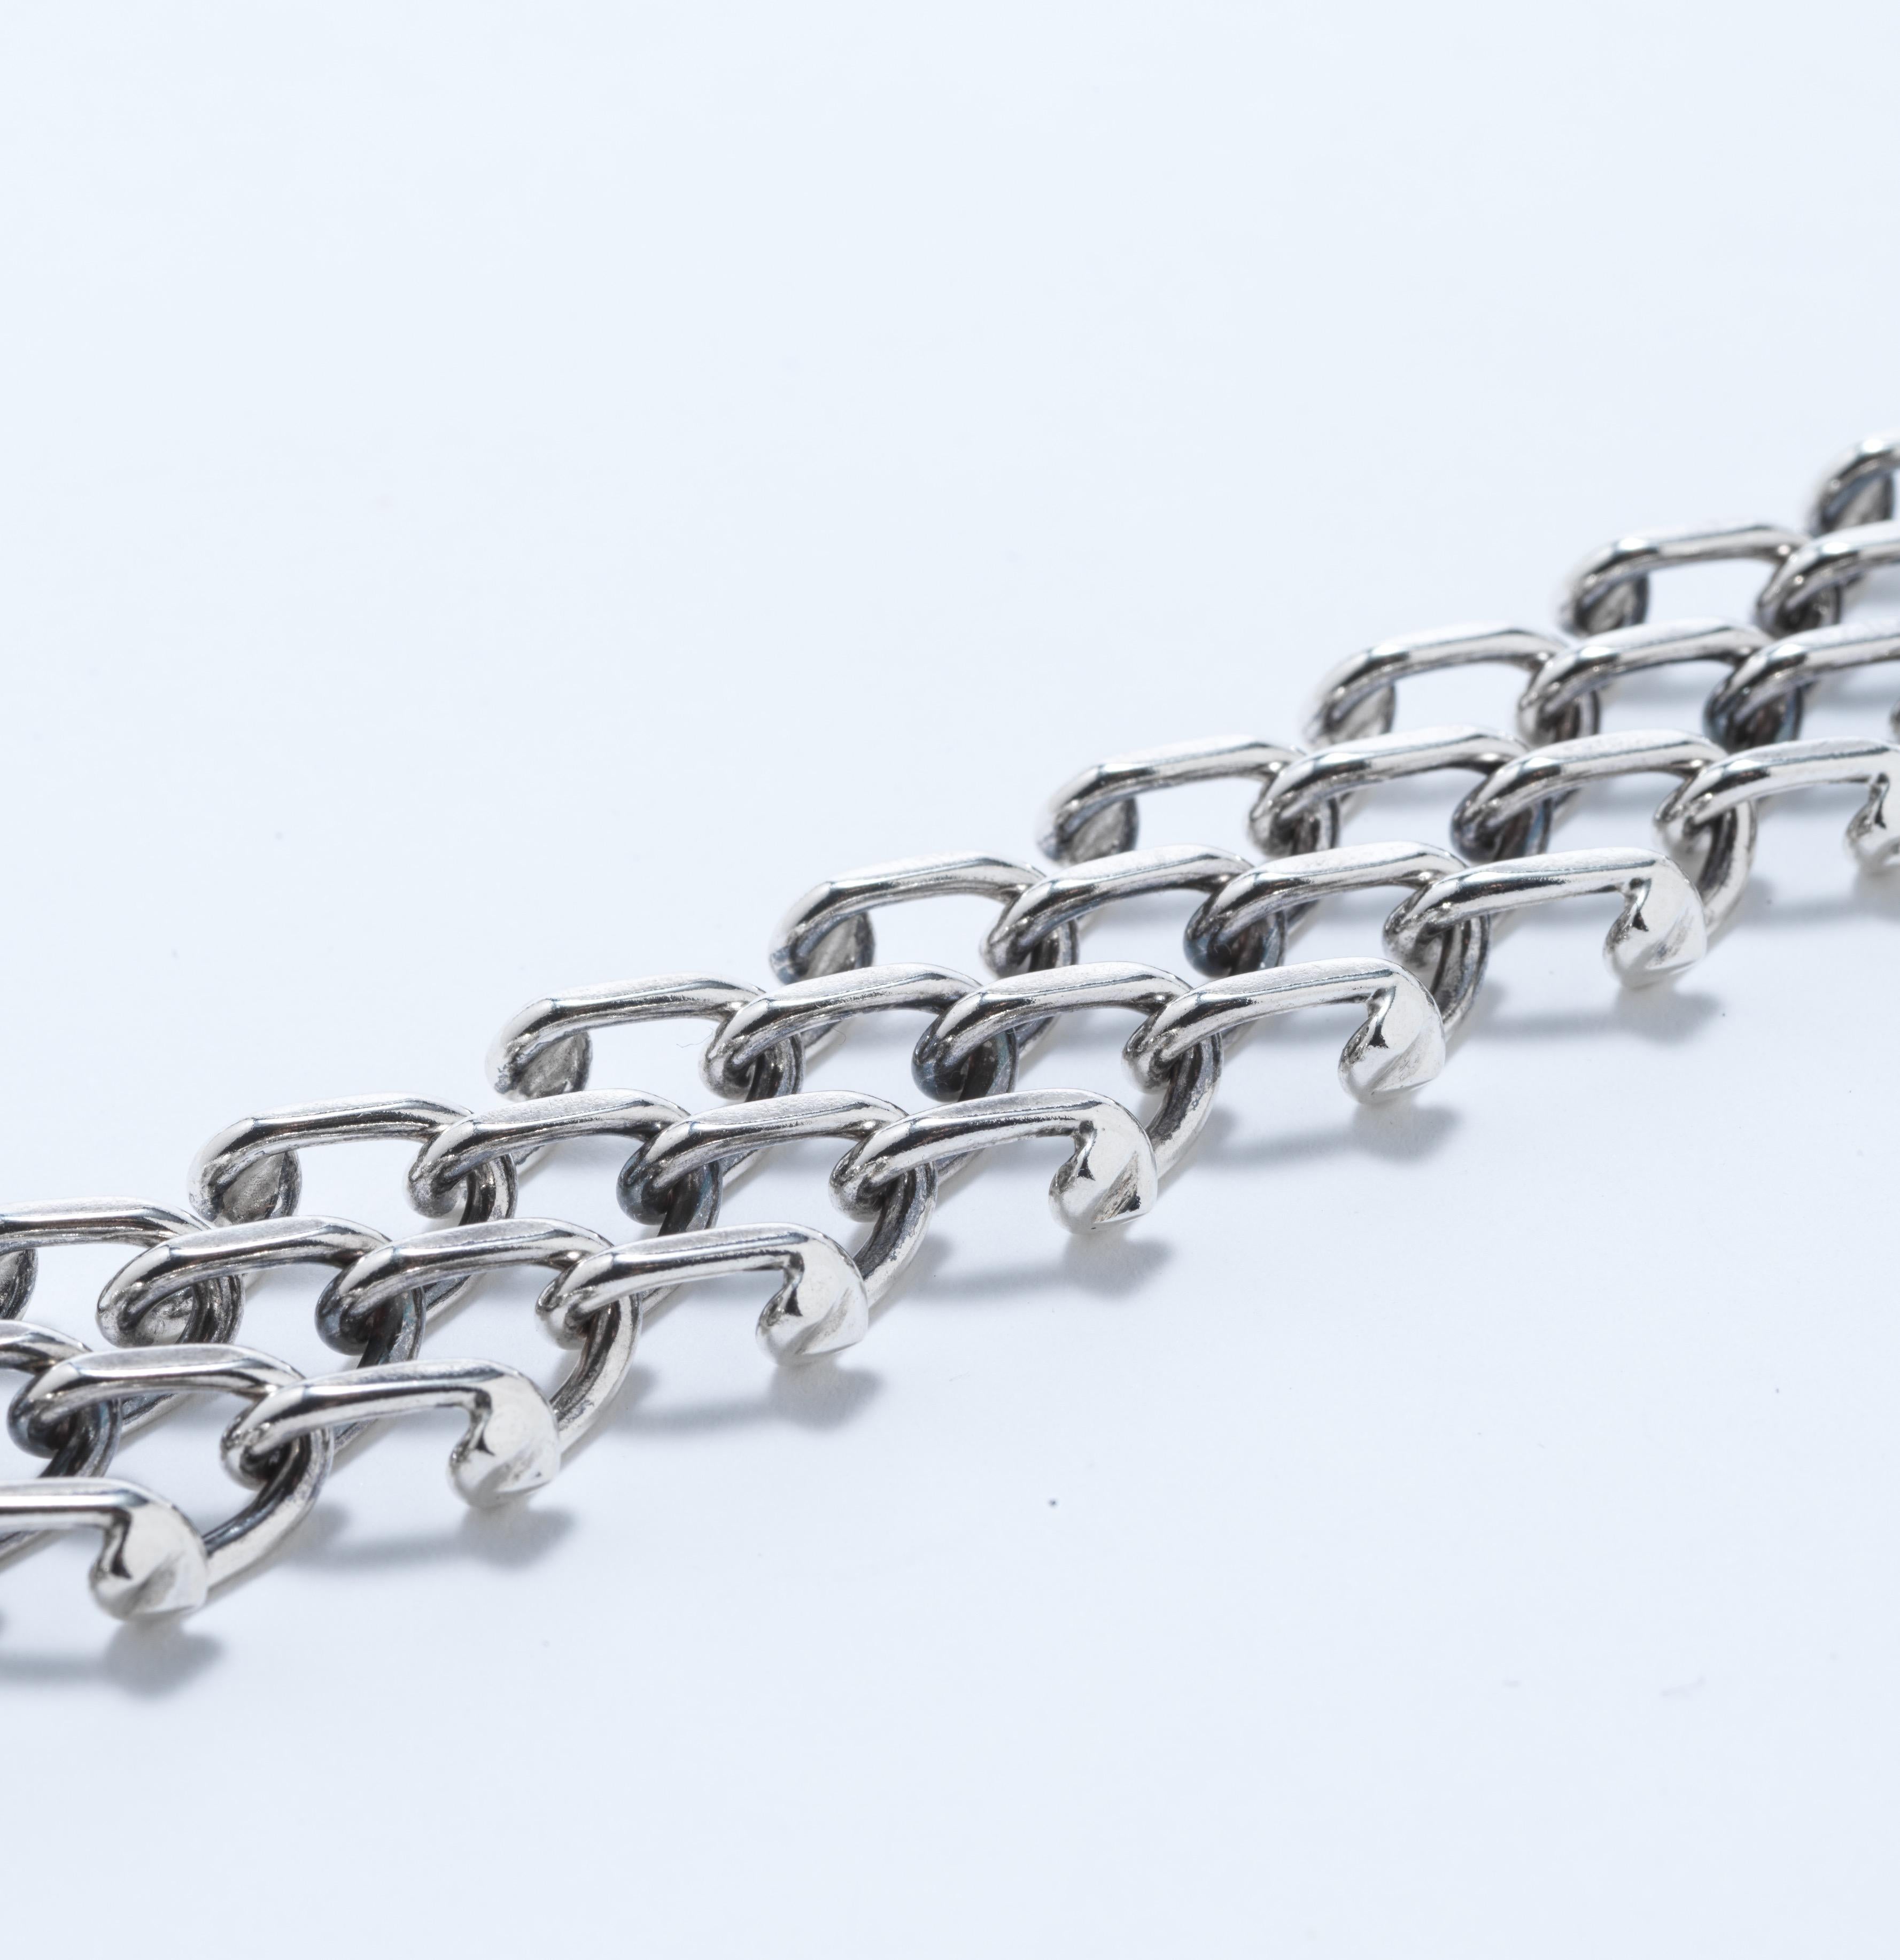  Vintage silver bracelet made by Danish silver makers Randers, 1970s For Sale 2